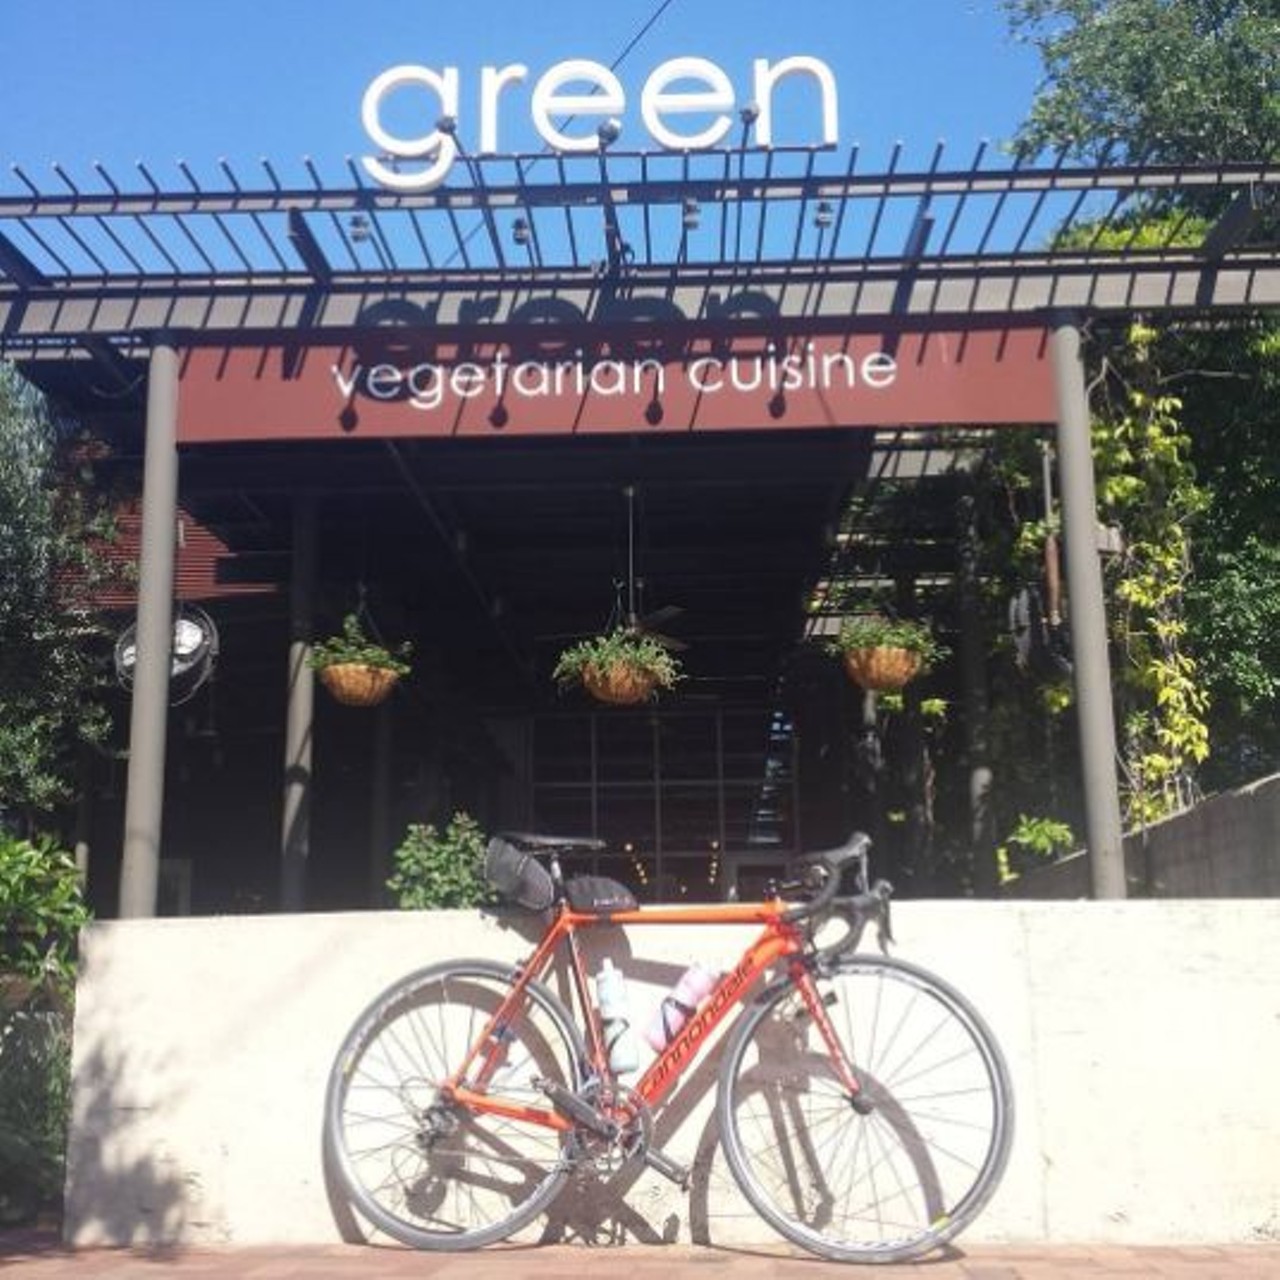 Green Vegetarian Cuisine 
200 E. Grayson St., (210) 320-5865 
Snack on some delicious veggies while sipping on your favorite brew from home.
Photo via Instagram, bikejitsu